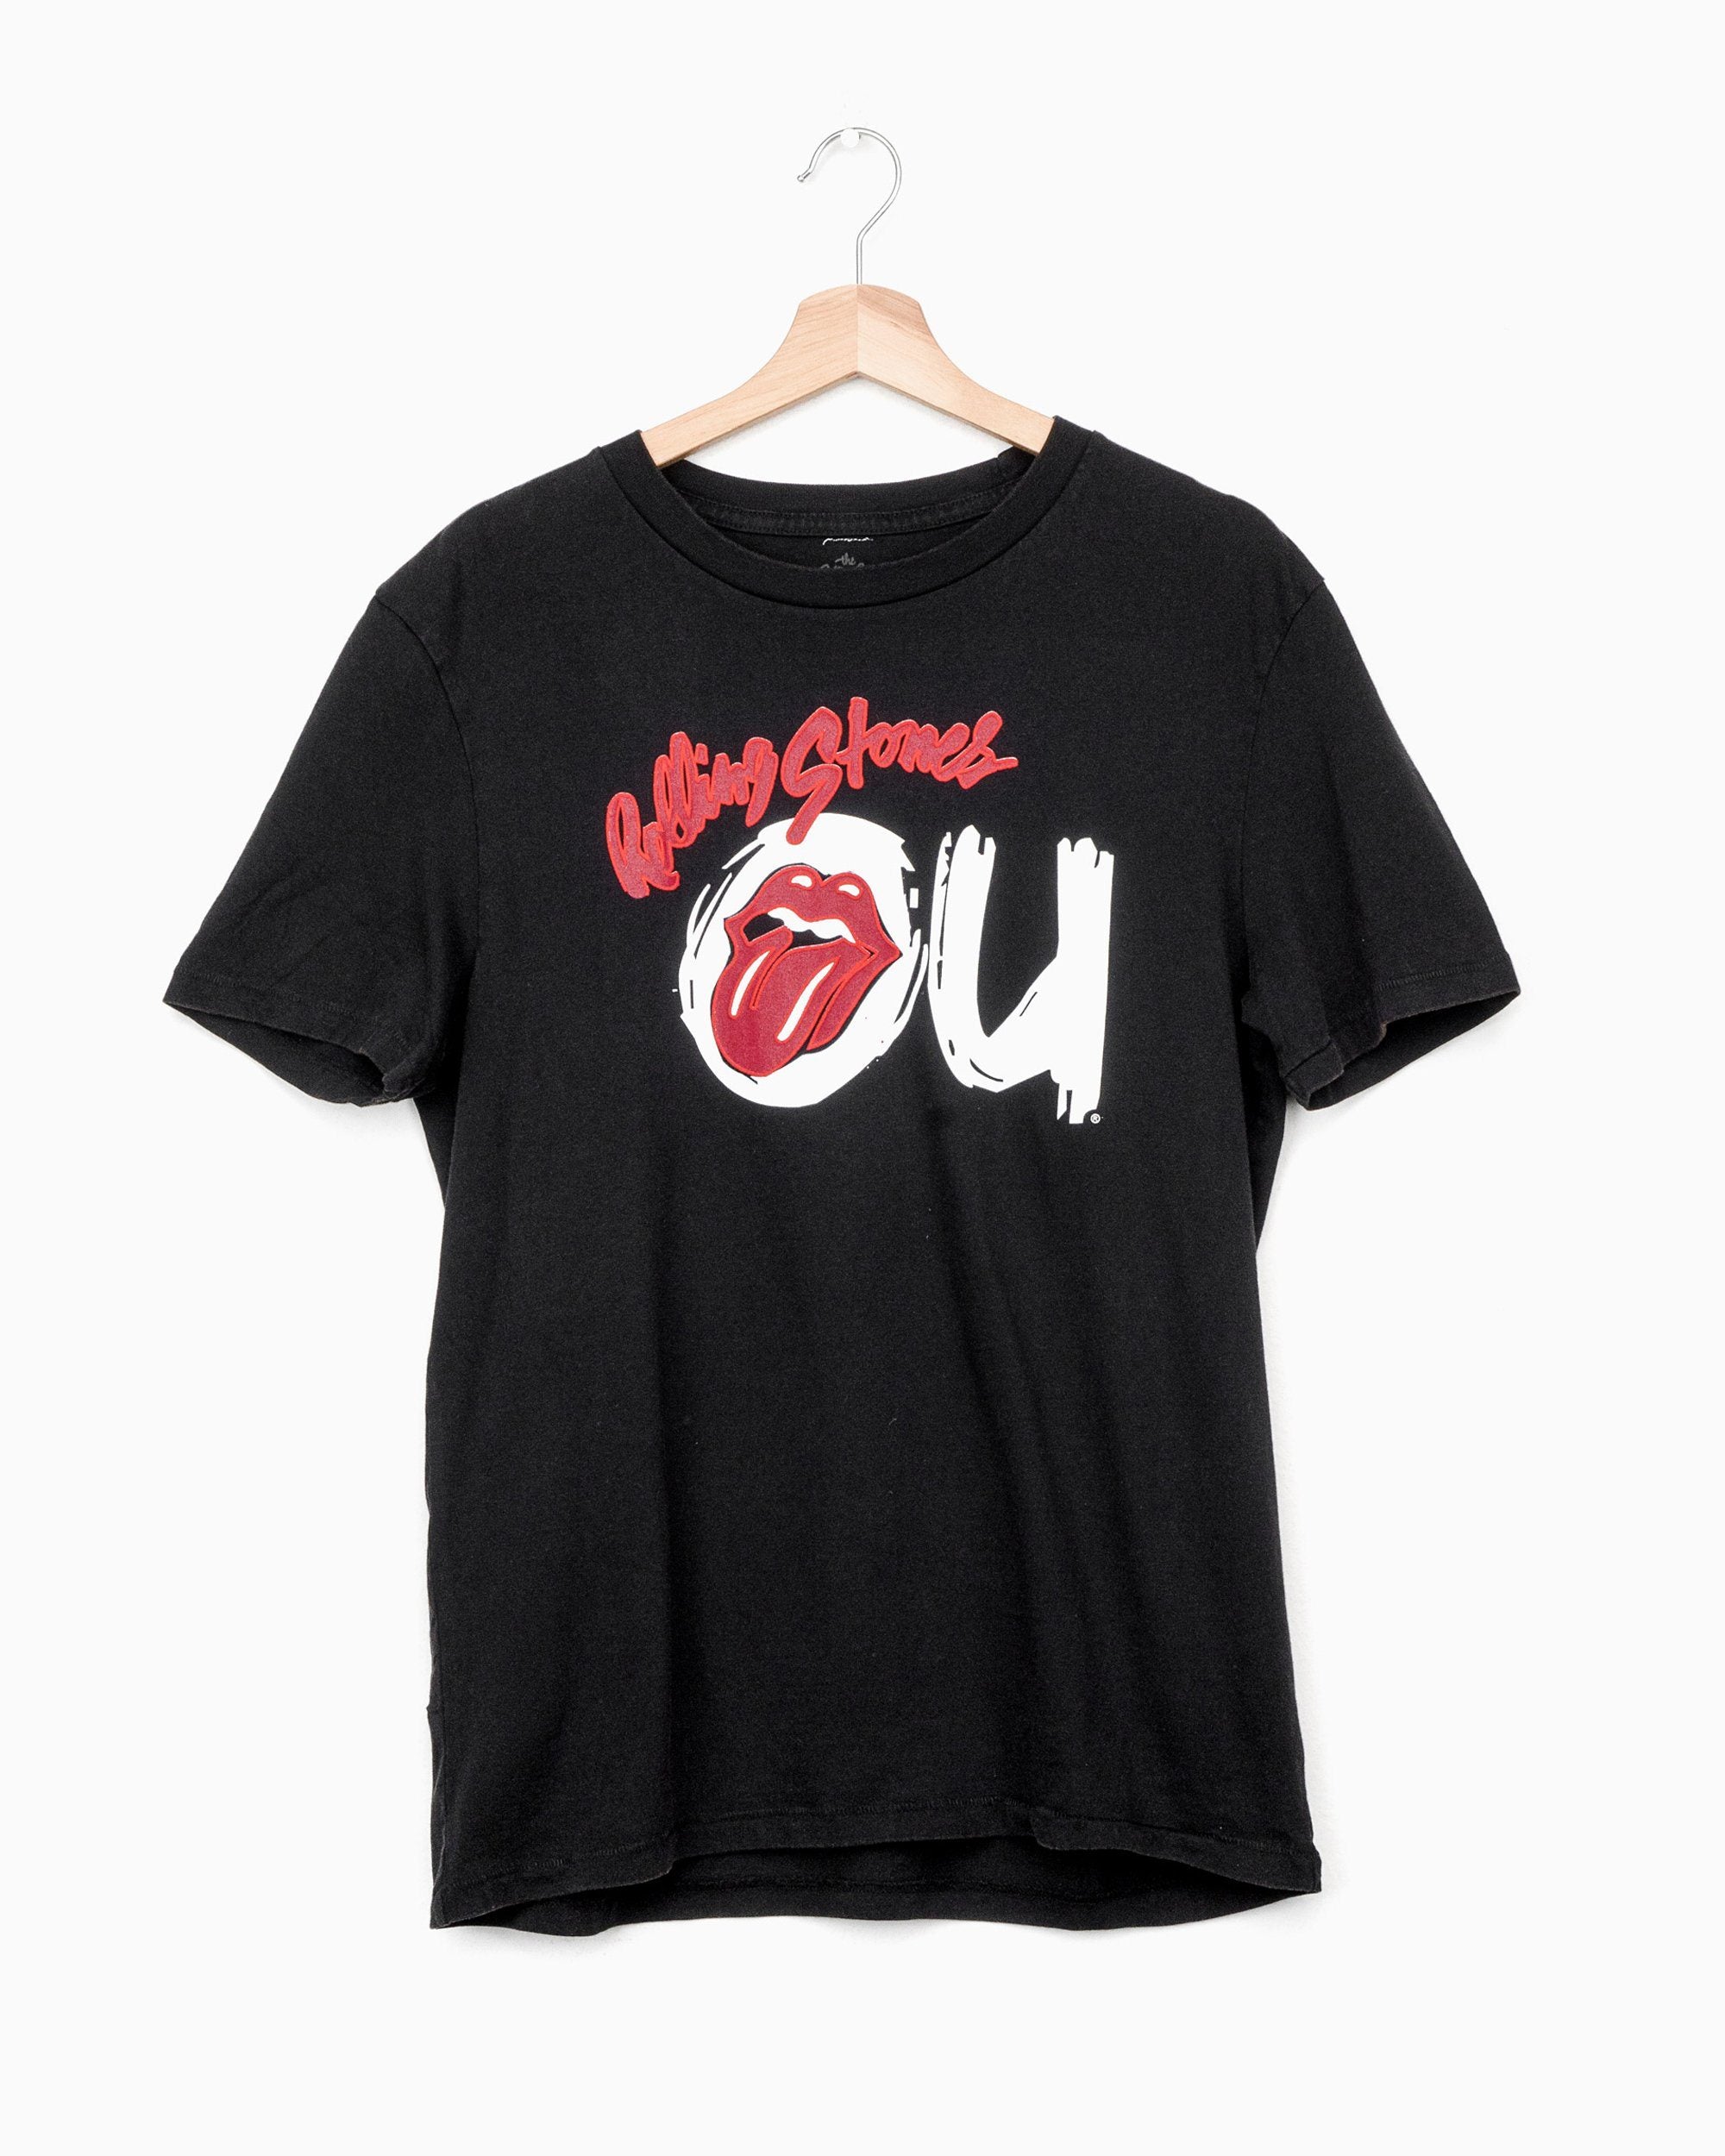 Rolling Stones OU Inside Lick Black Puff Ink Tee (4519334084711)